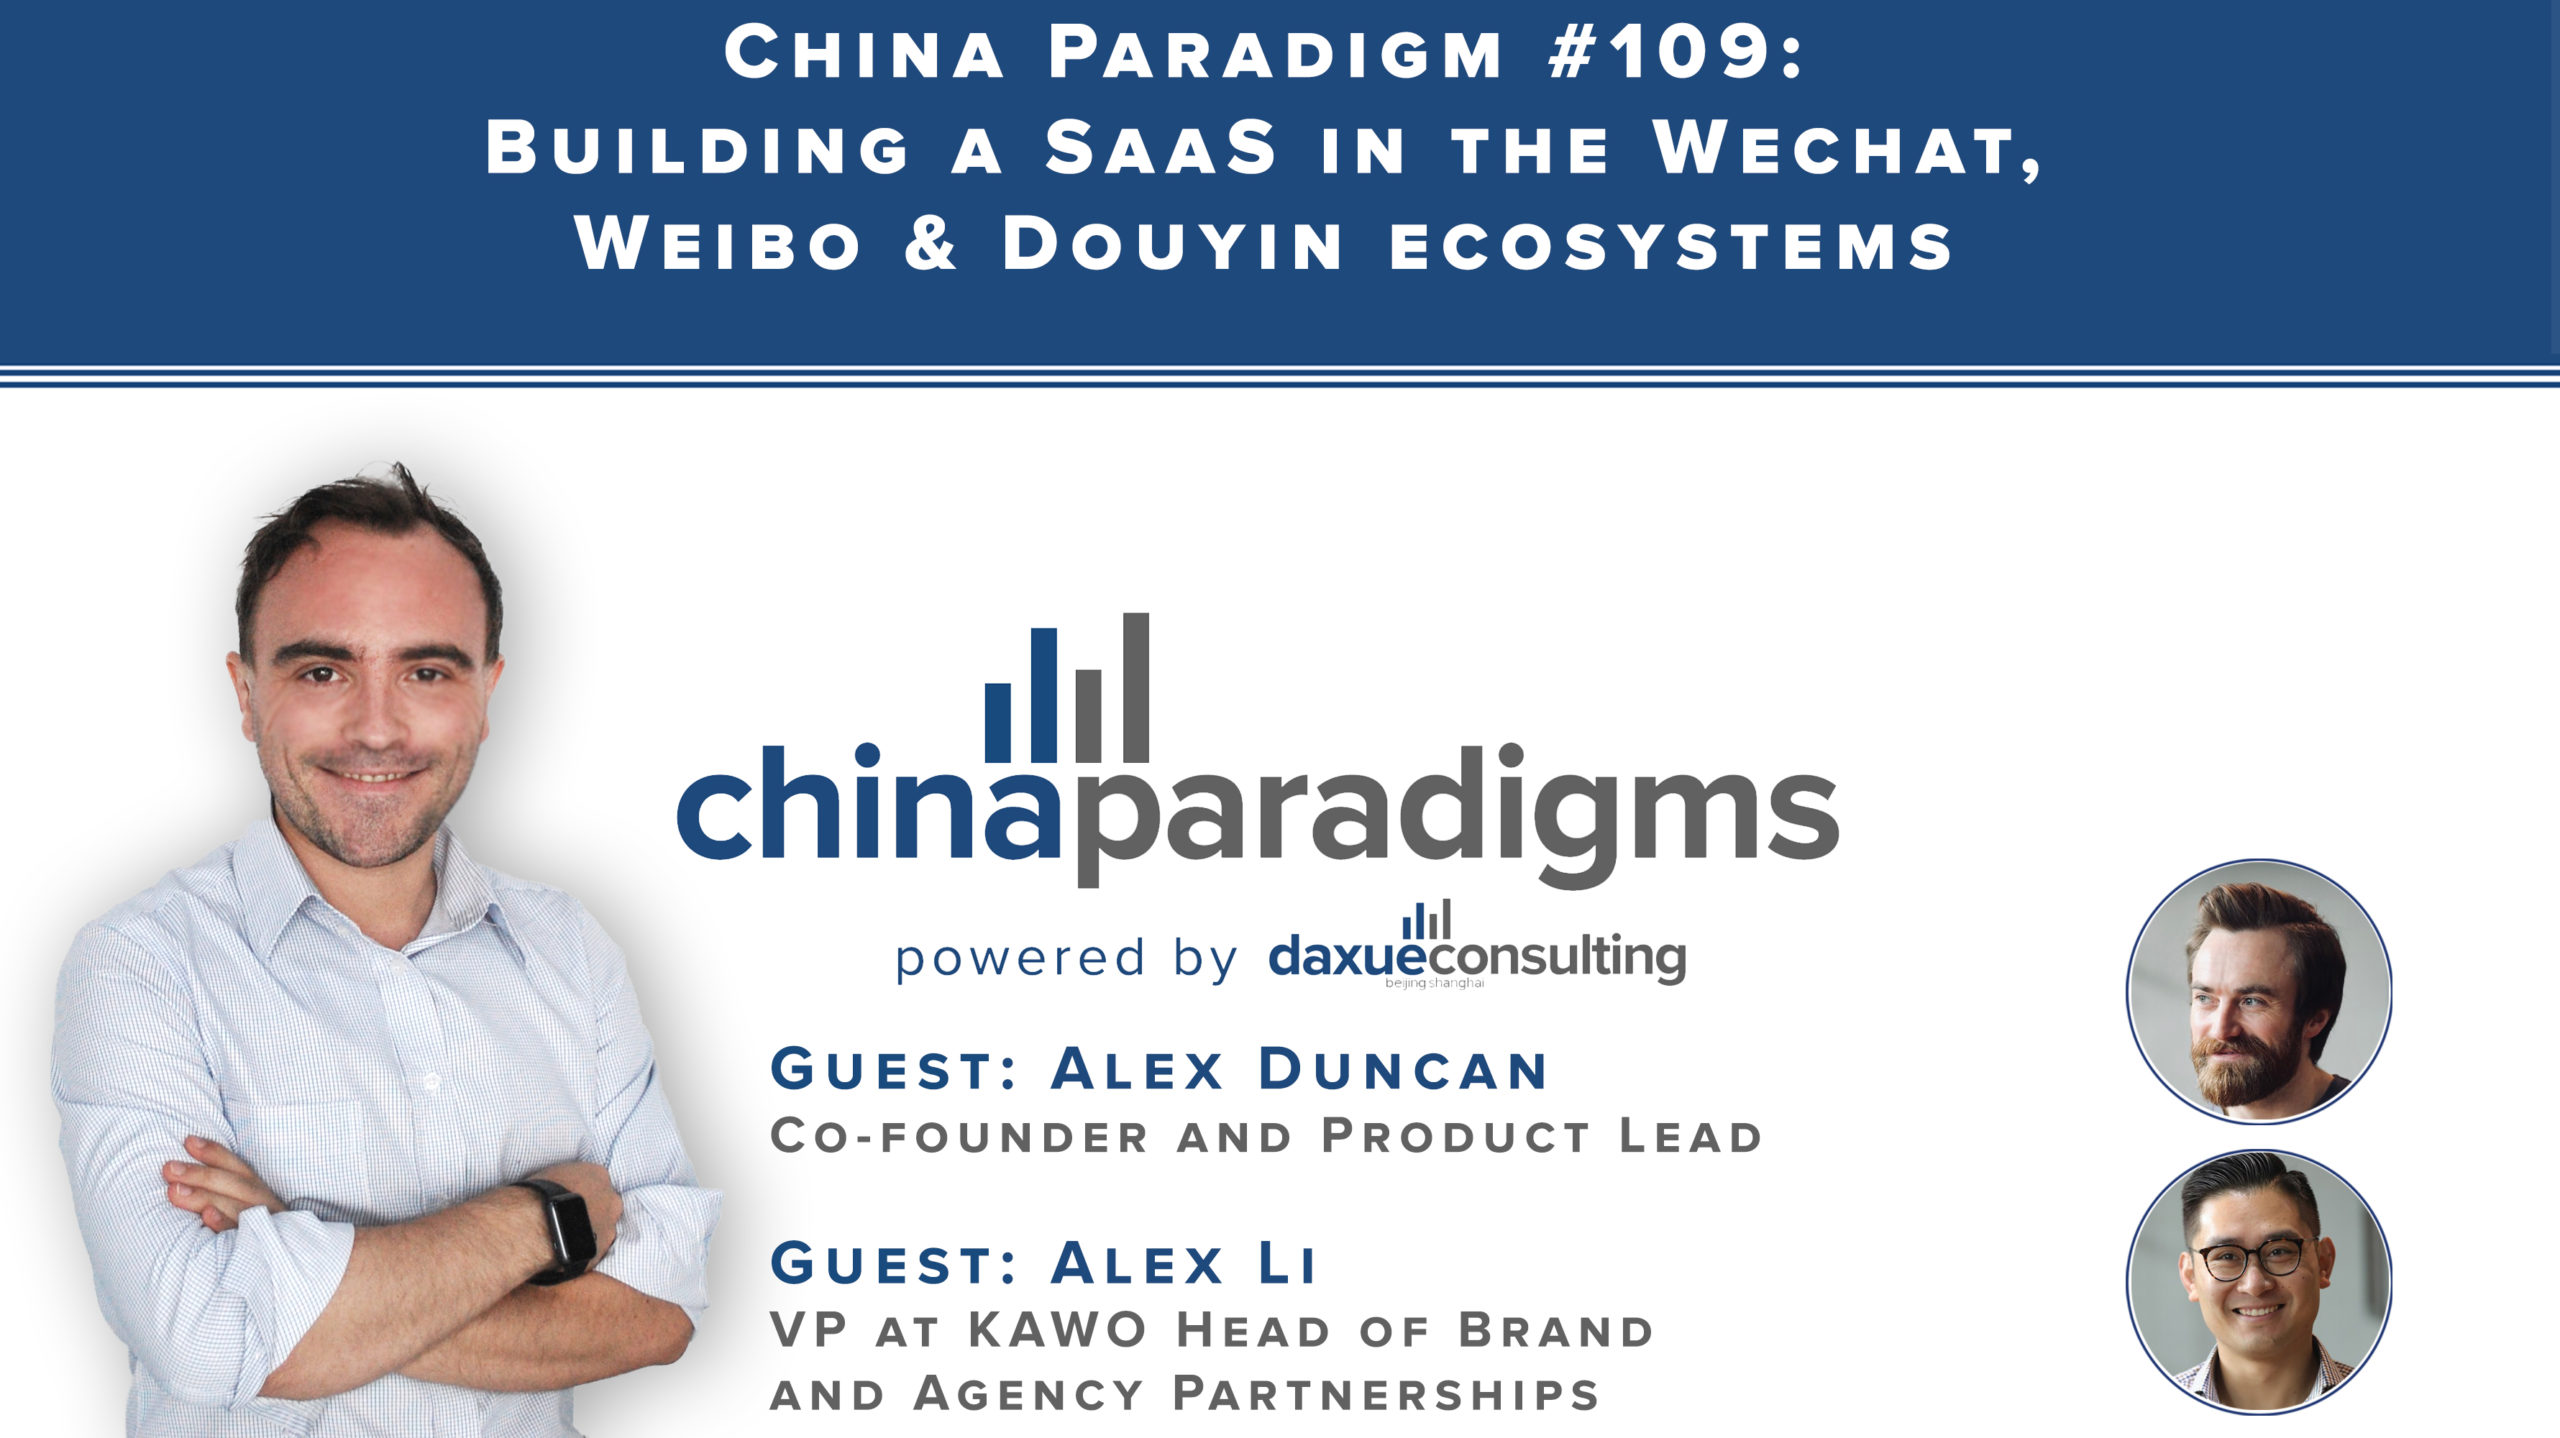 China Paradigm 109: Building a SaaS in the Wechat, Weibo & Douyin ecosystems